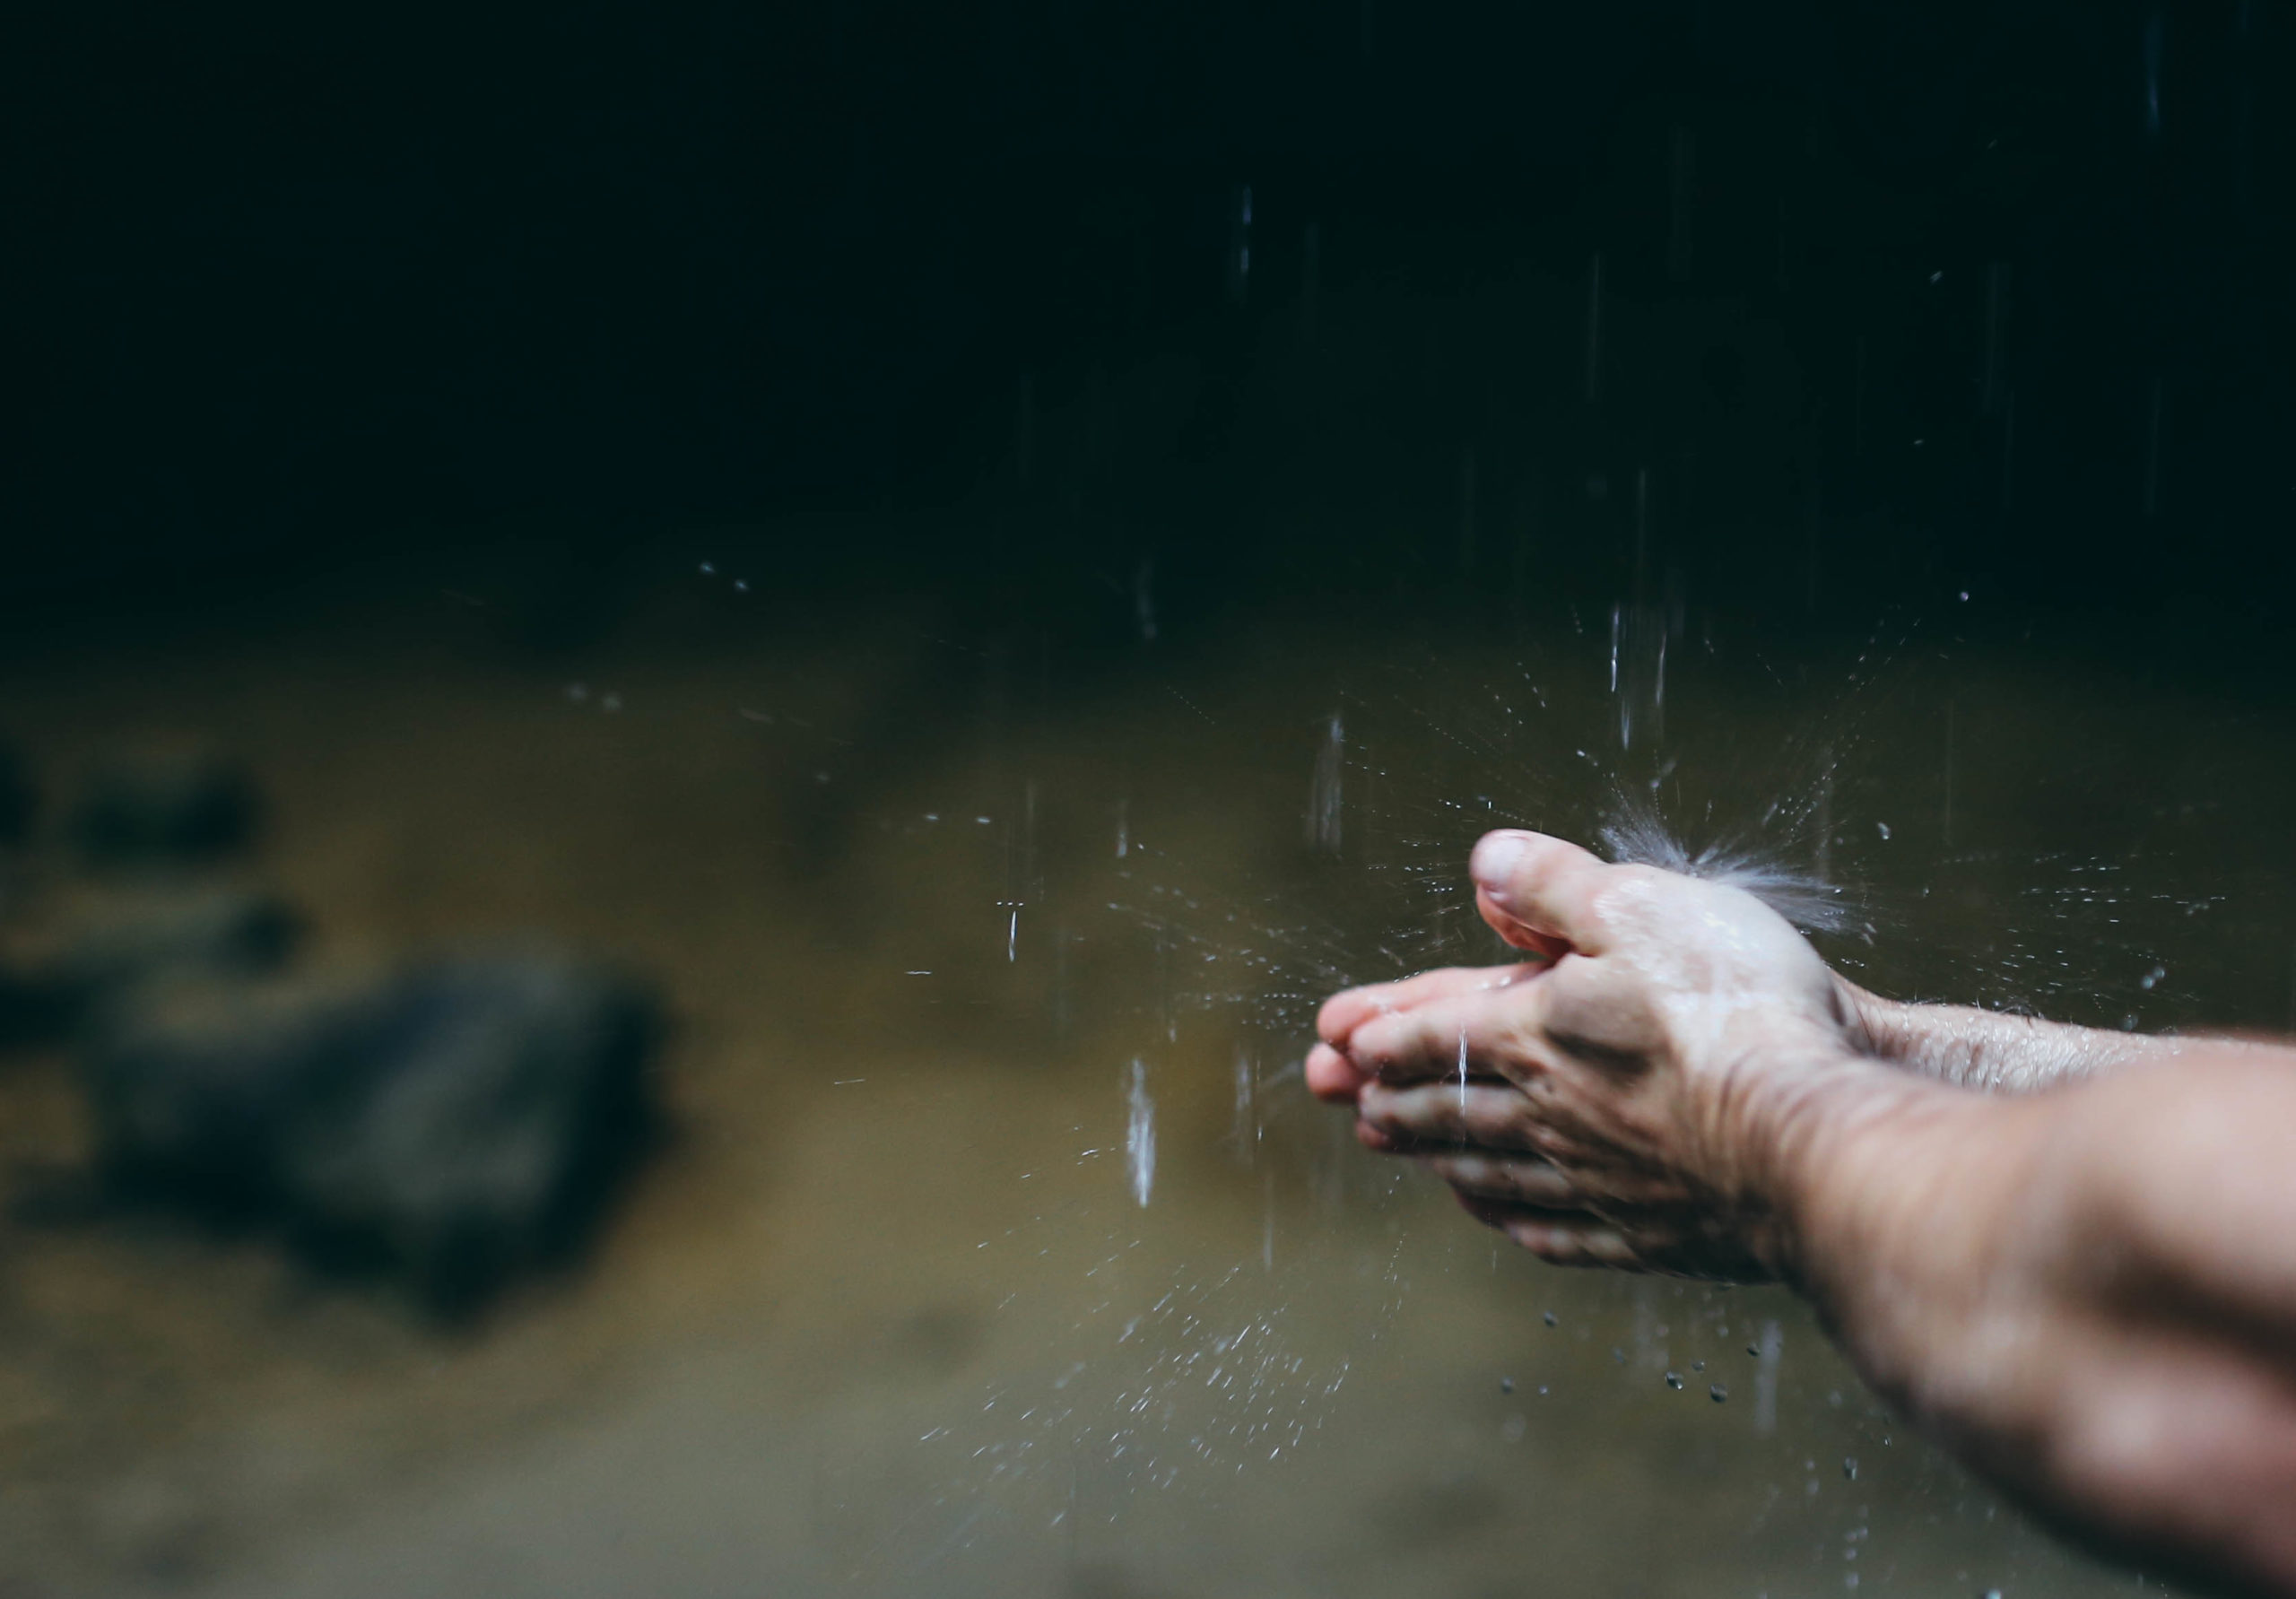 This is a photo of a pair of hands washing under falling rain used for the article titled 'The cost of business integrity is priceless' written by Phoebe Netto, PR Consultant from Sydney.